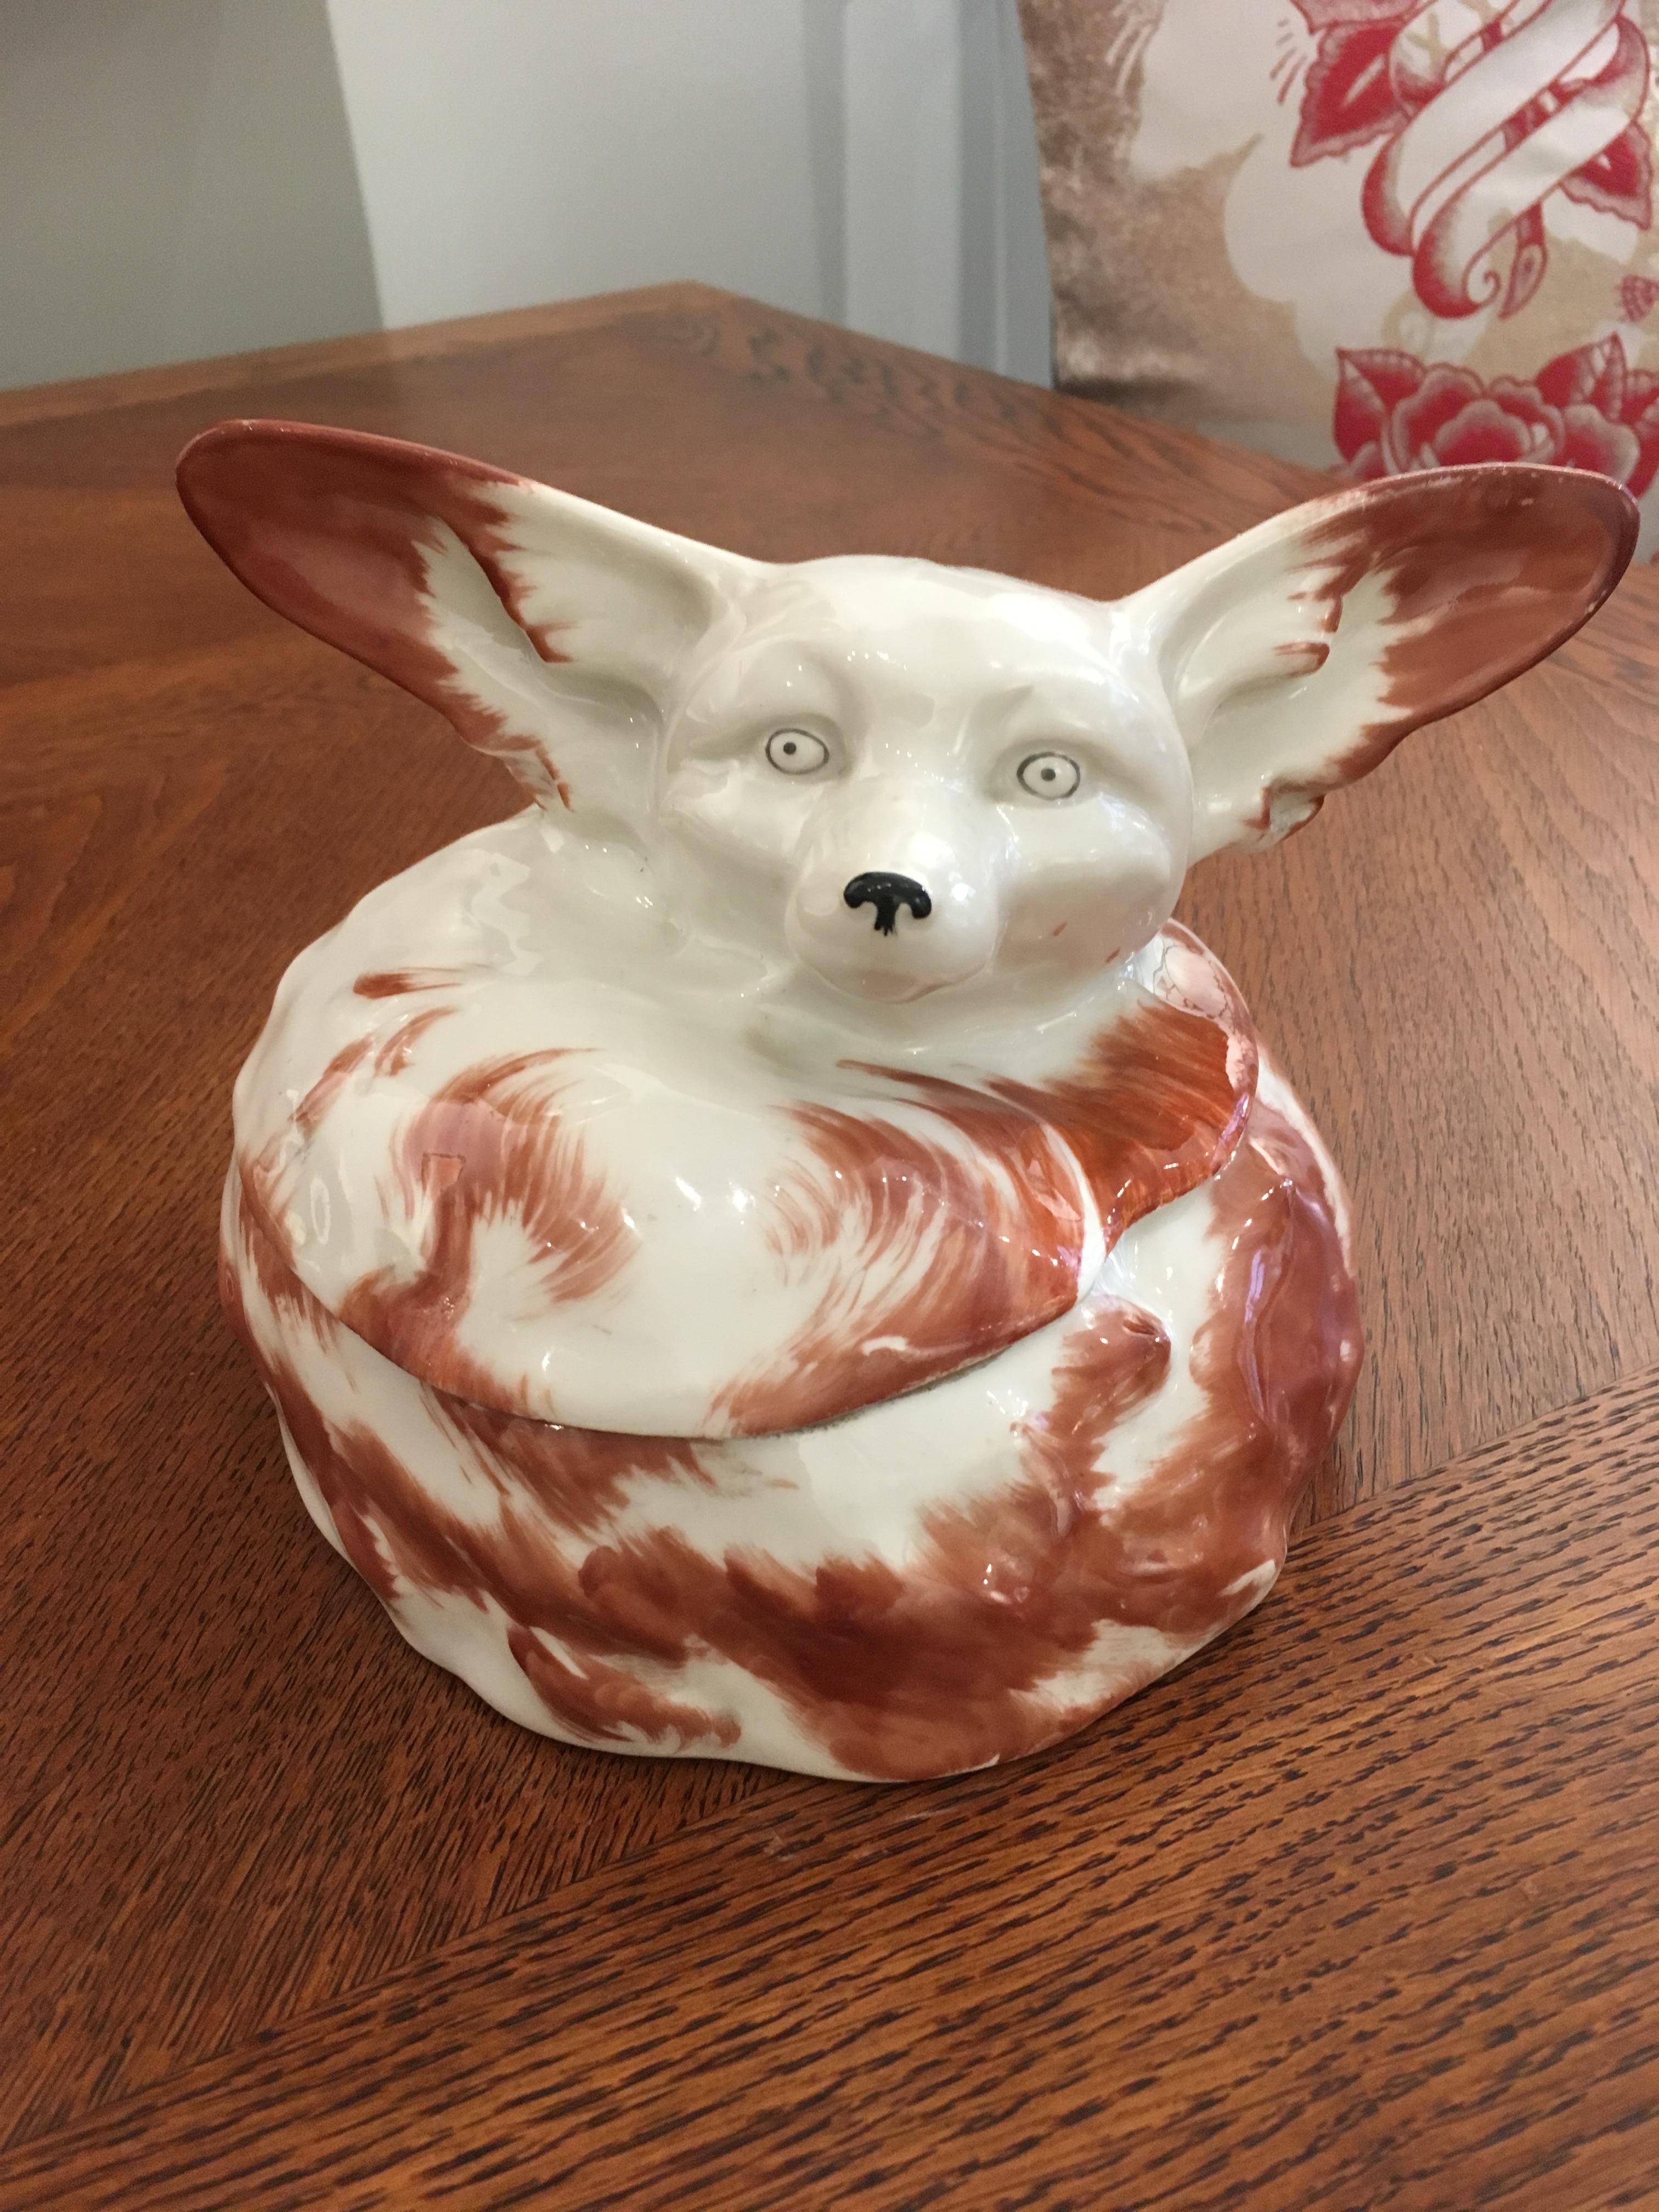 Zoomorphic enameled porcelain polychrome box represents a fennec fox.
Manufactured by Théodore Haviland Porcelain, model was created in 1921 by great Swiss sculptor Édouard-Marcel Sandoz (1888-1971).
 
Signed E.M. SANDOZ sc, stamps Theodore